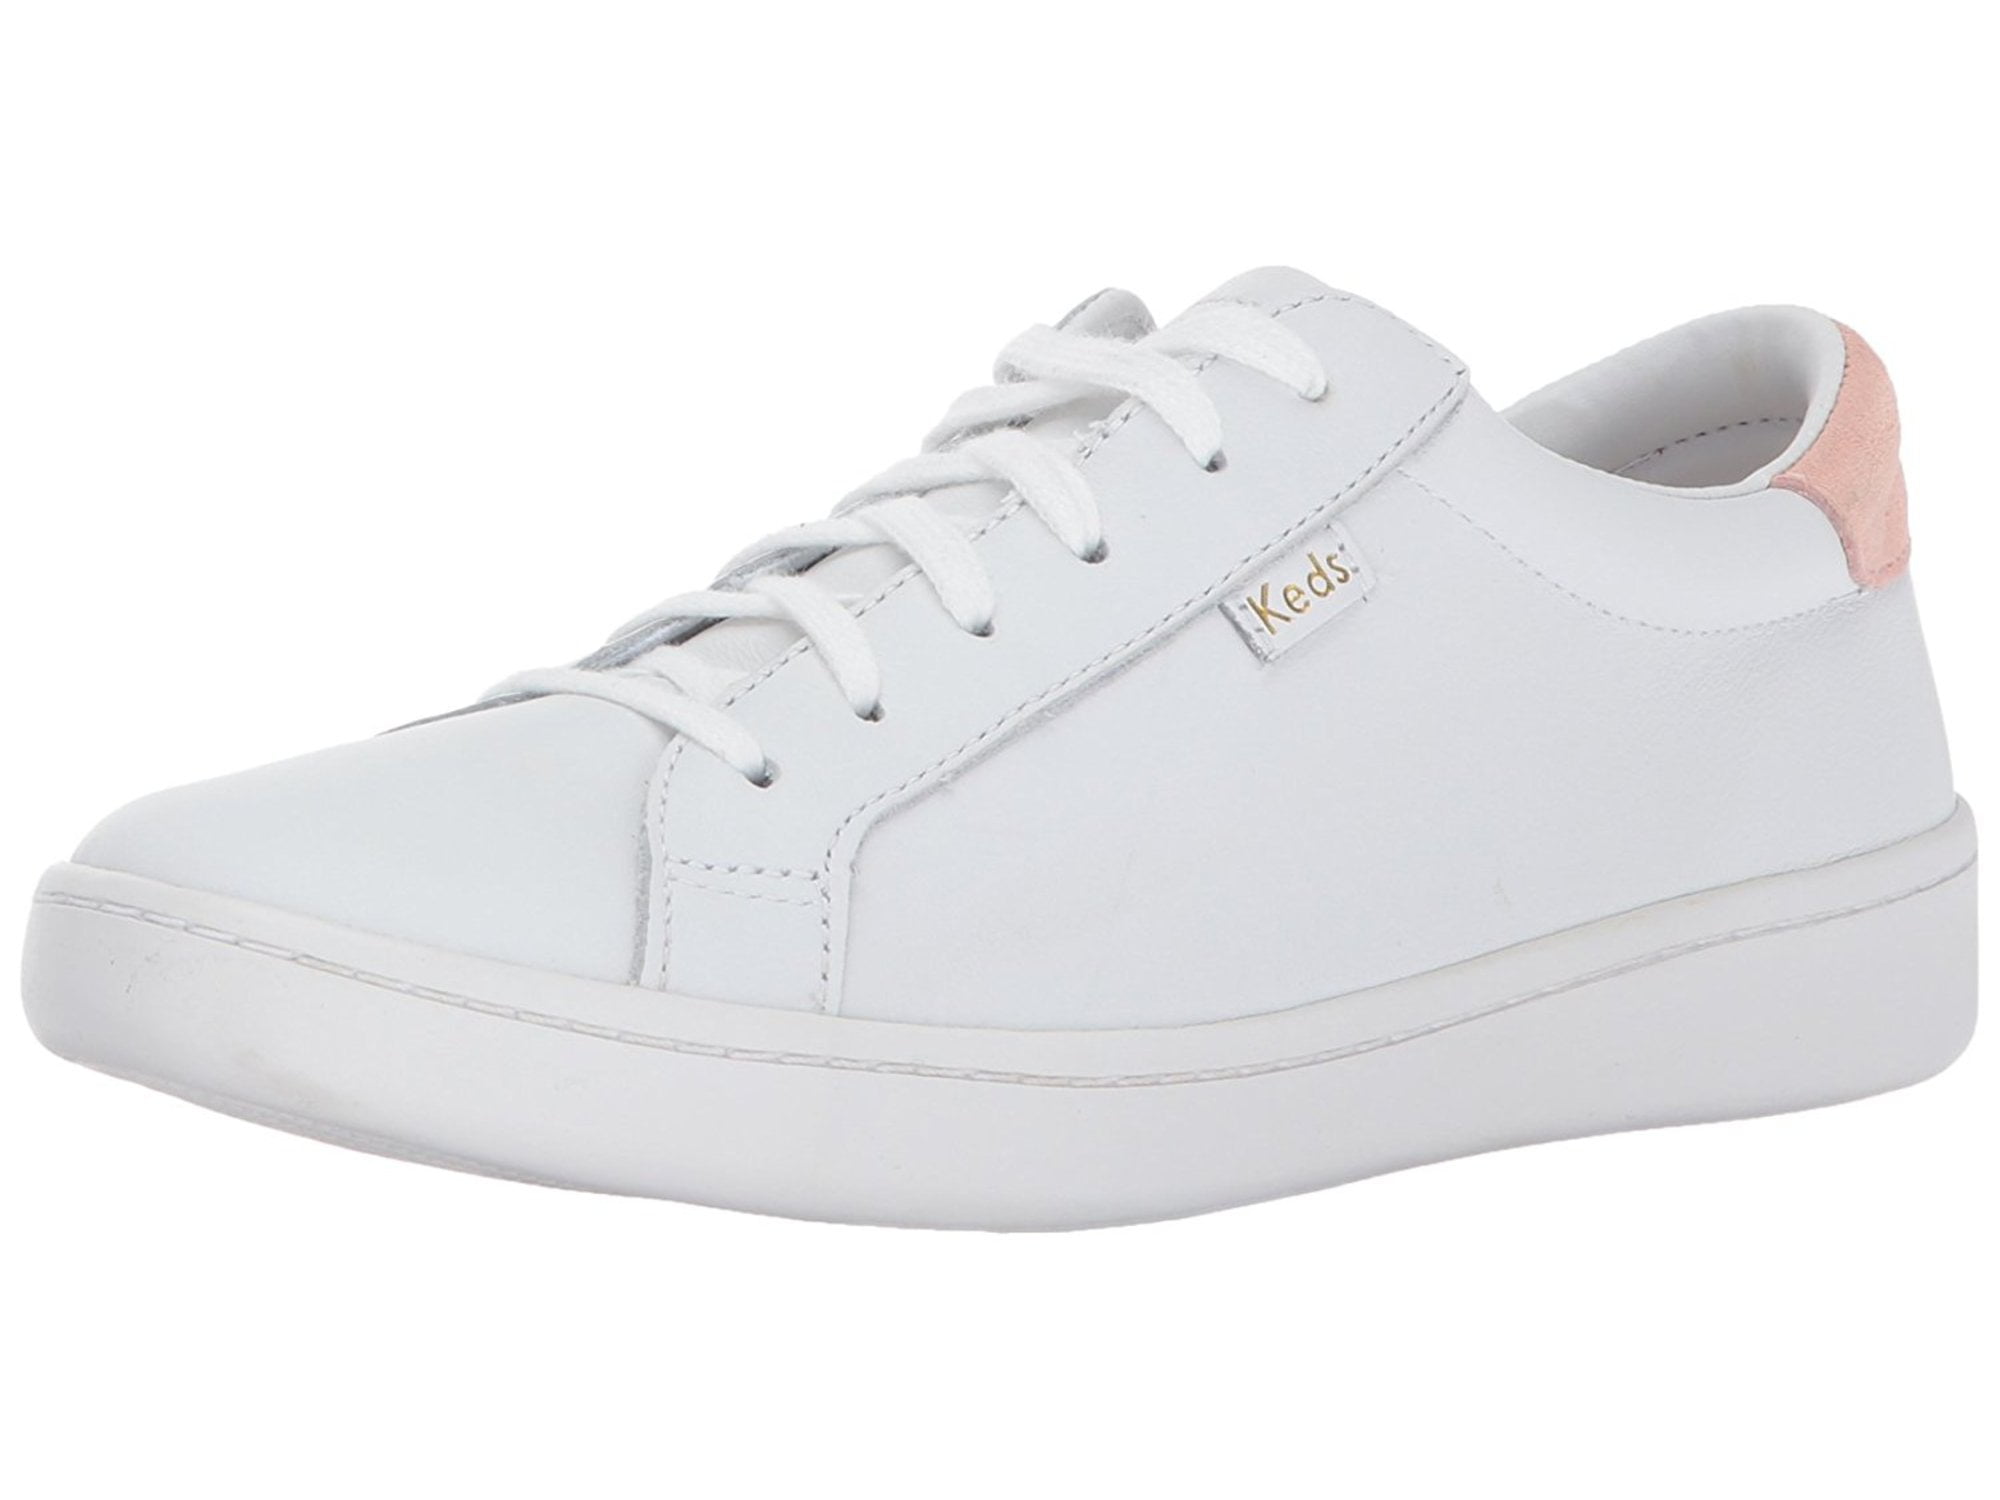 Keds Women's Ace Leather Shoe in White 